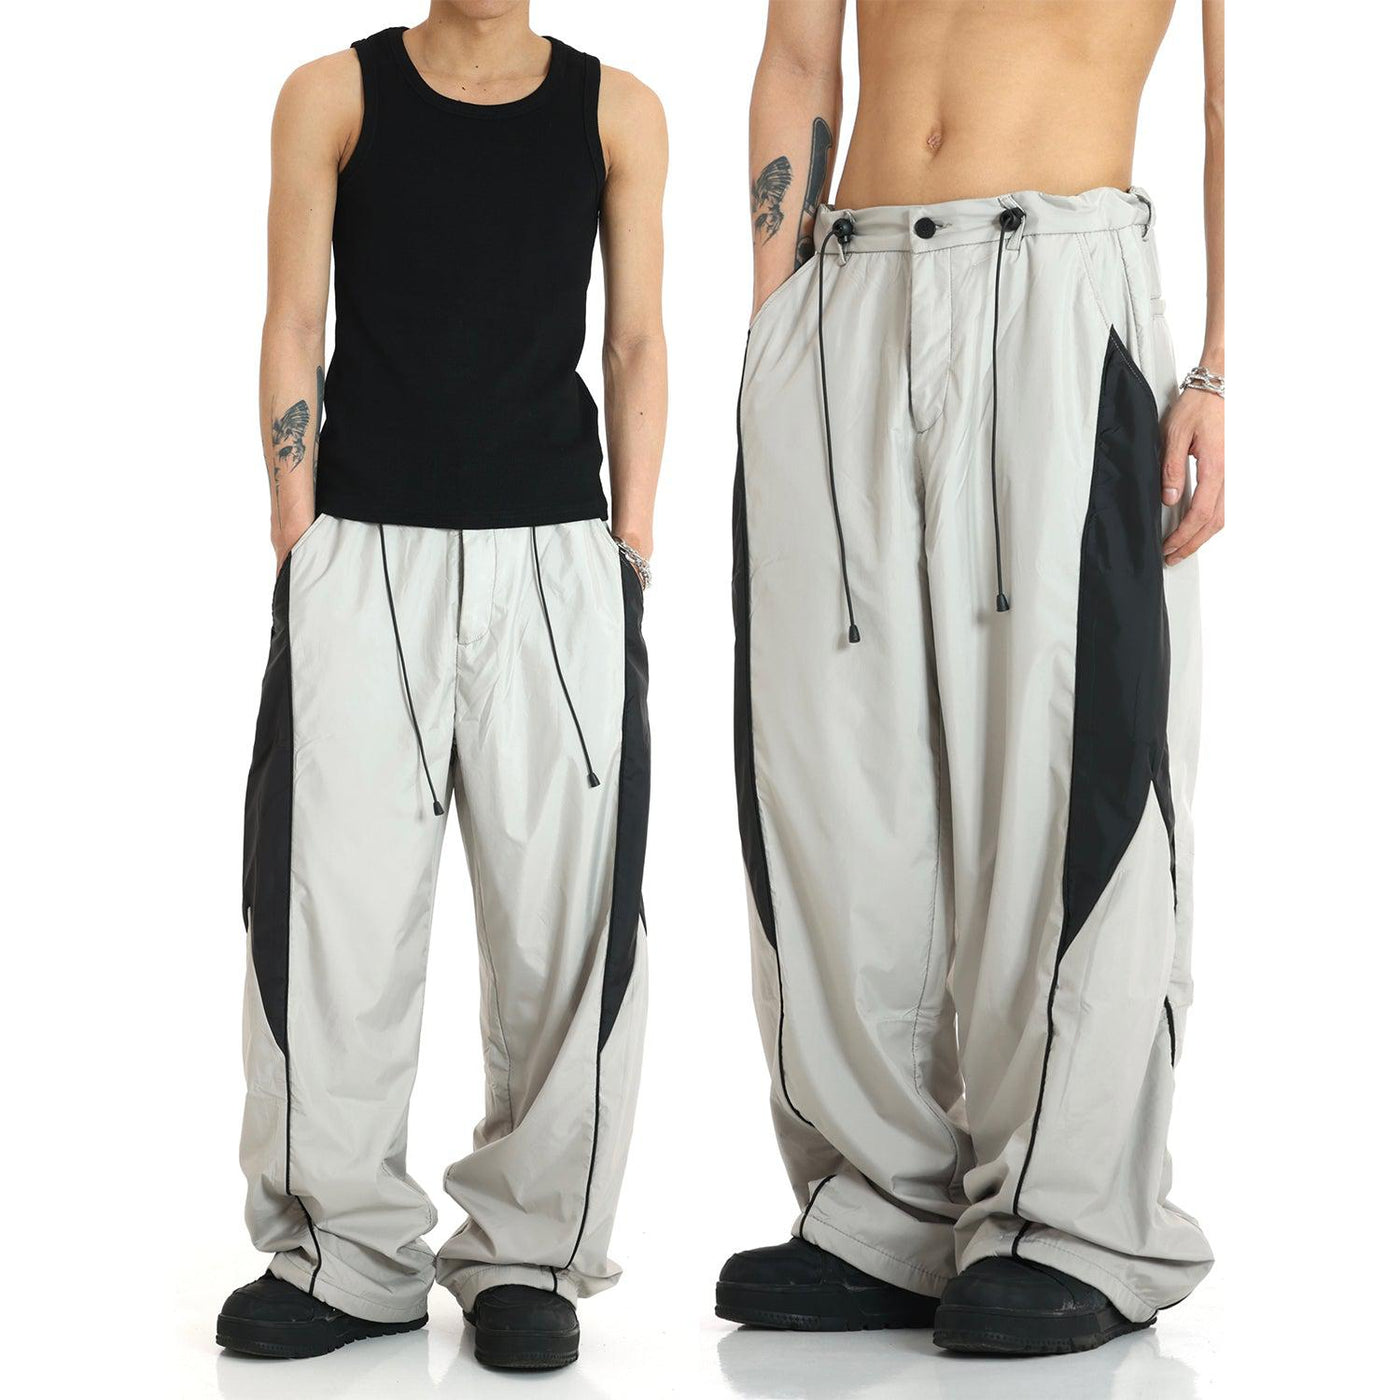 MEBXX Color Block Drawstring Track Pants Korean Street Fashion Pants By Made Extreme Shop Online at OH Vault